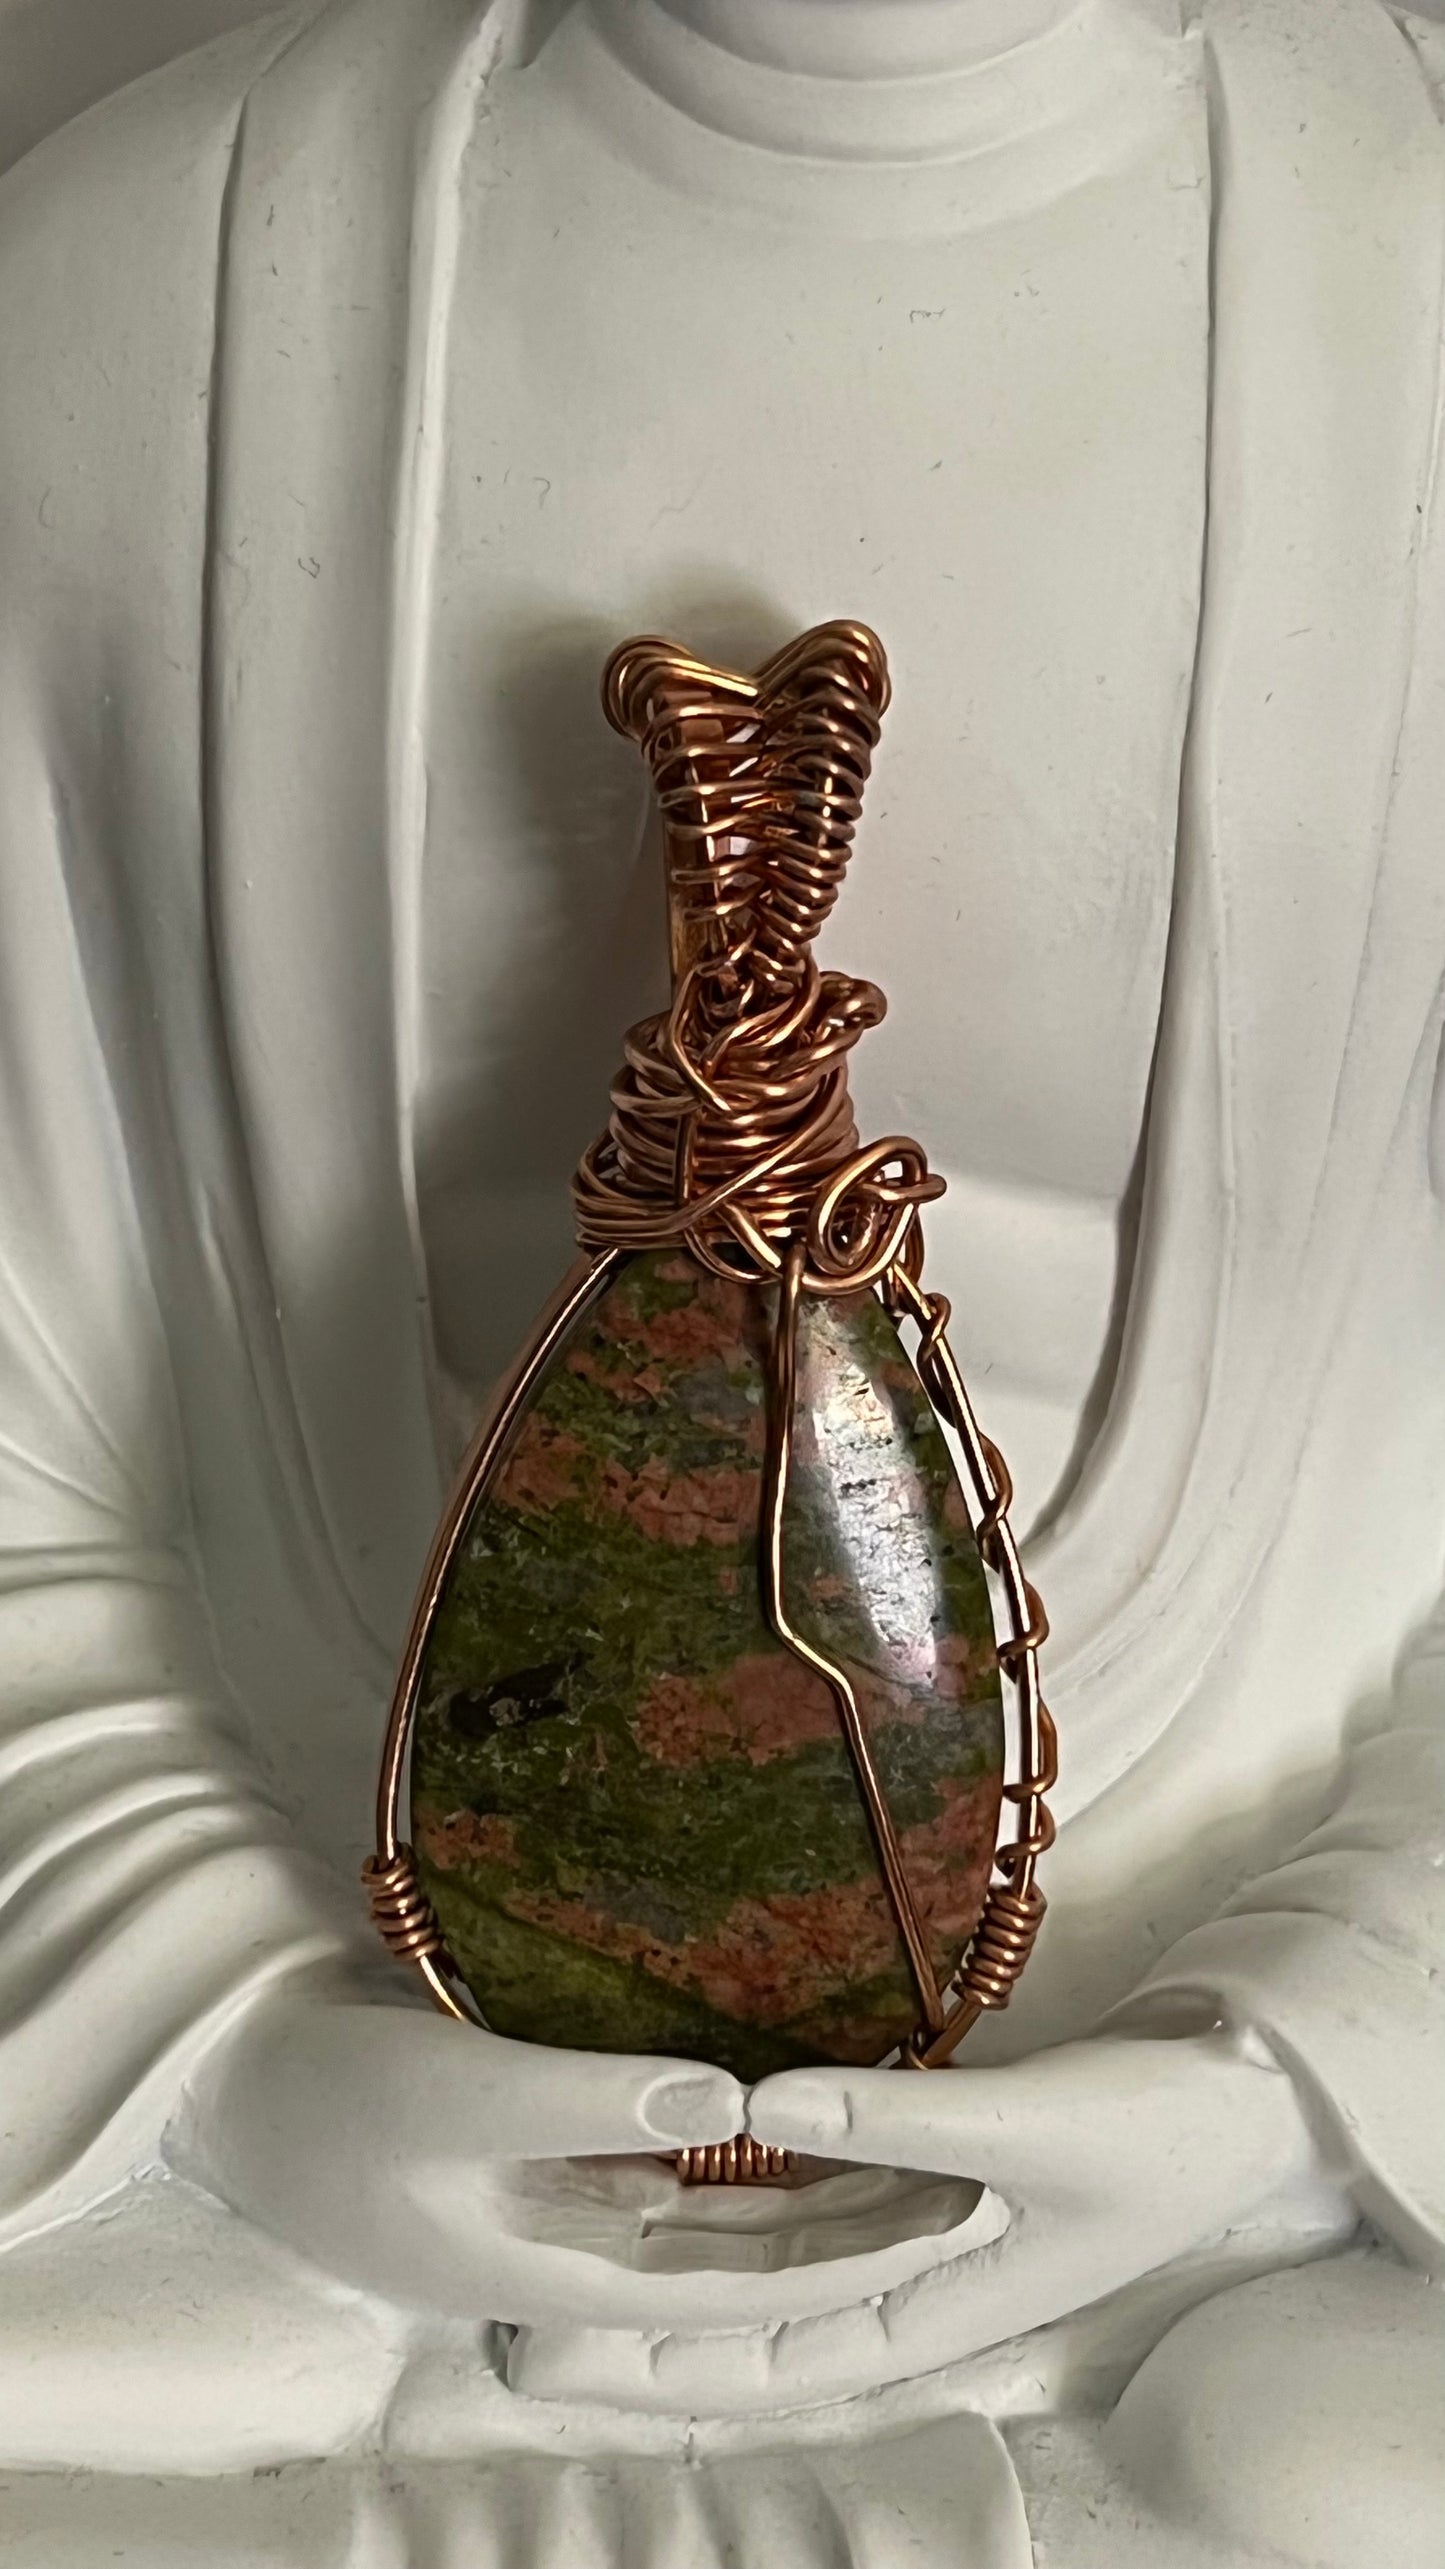 Ukanite-restore balance to the physical and emotional parts of our beings